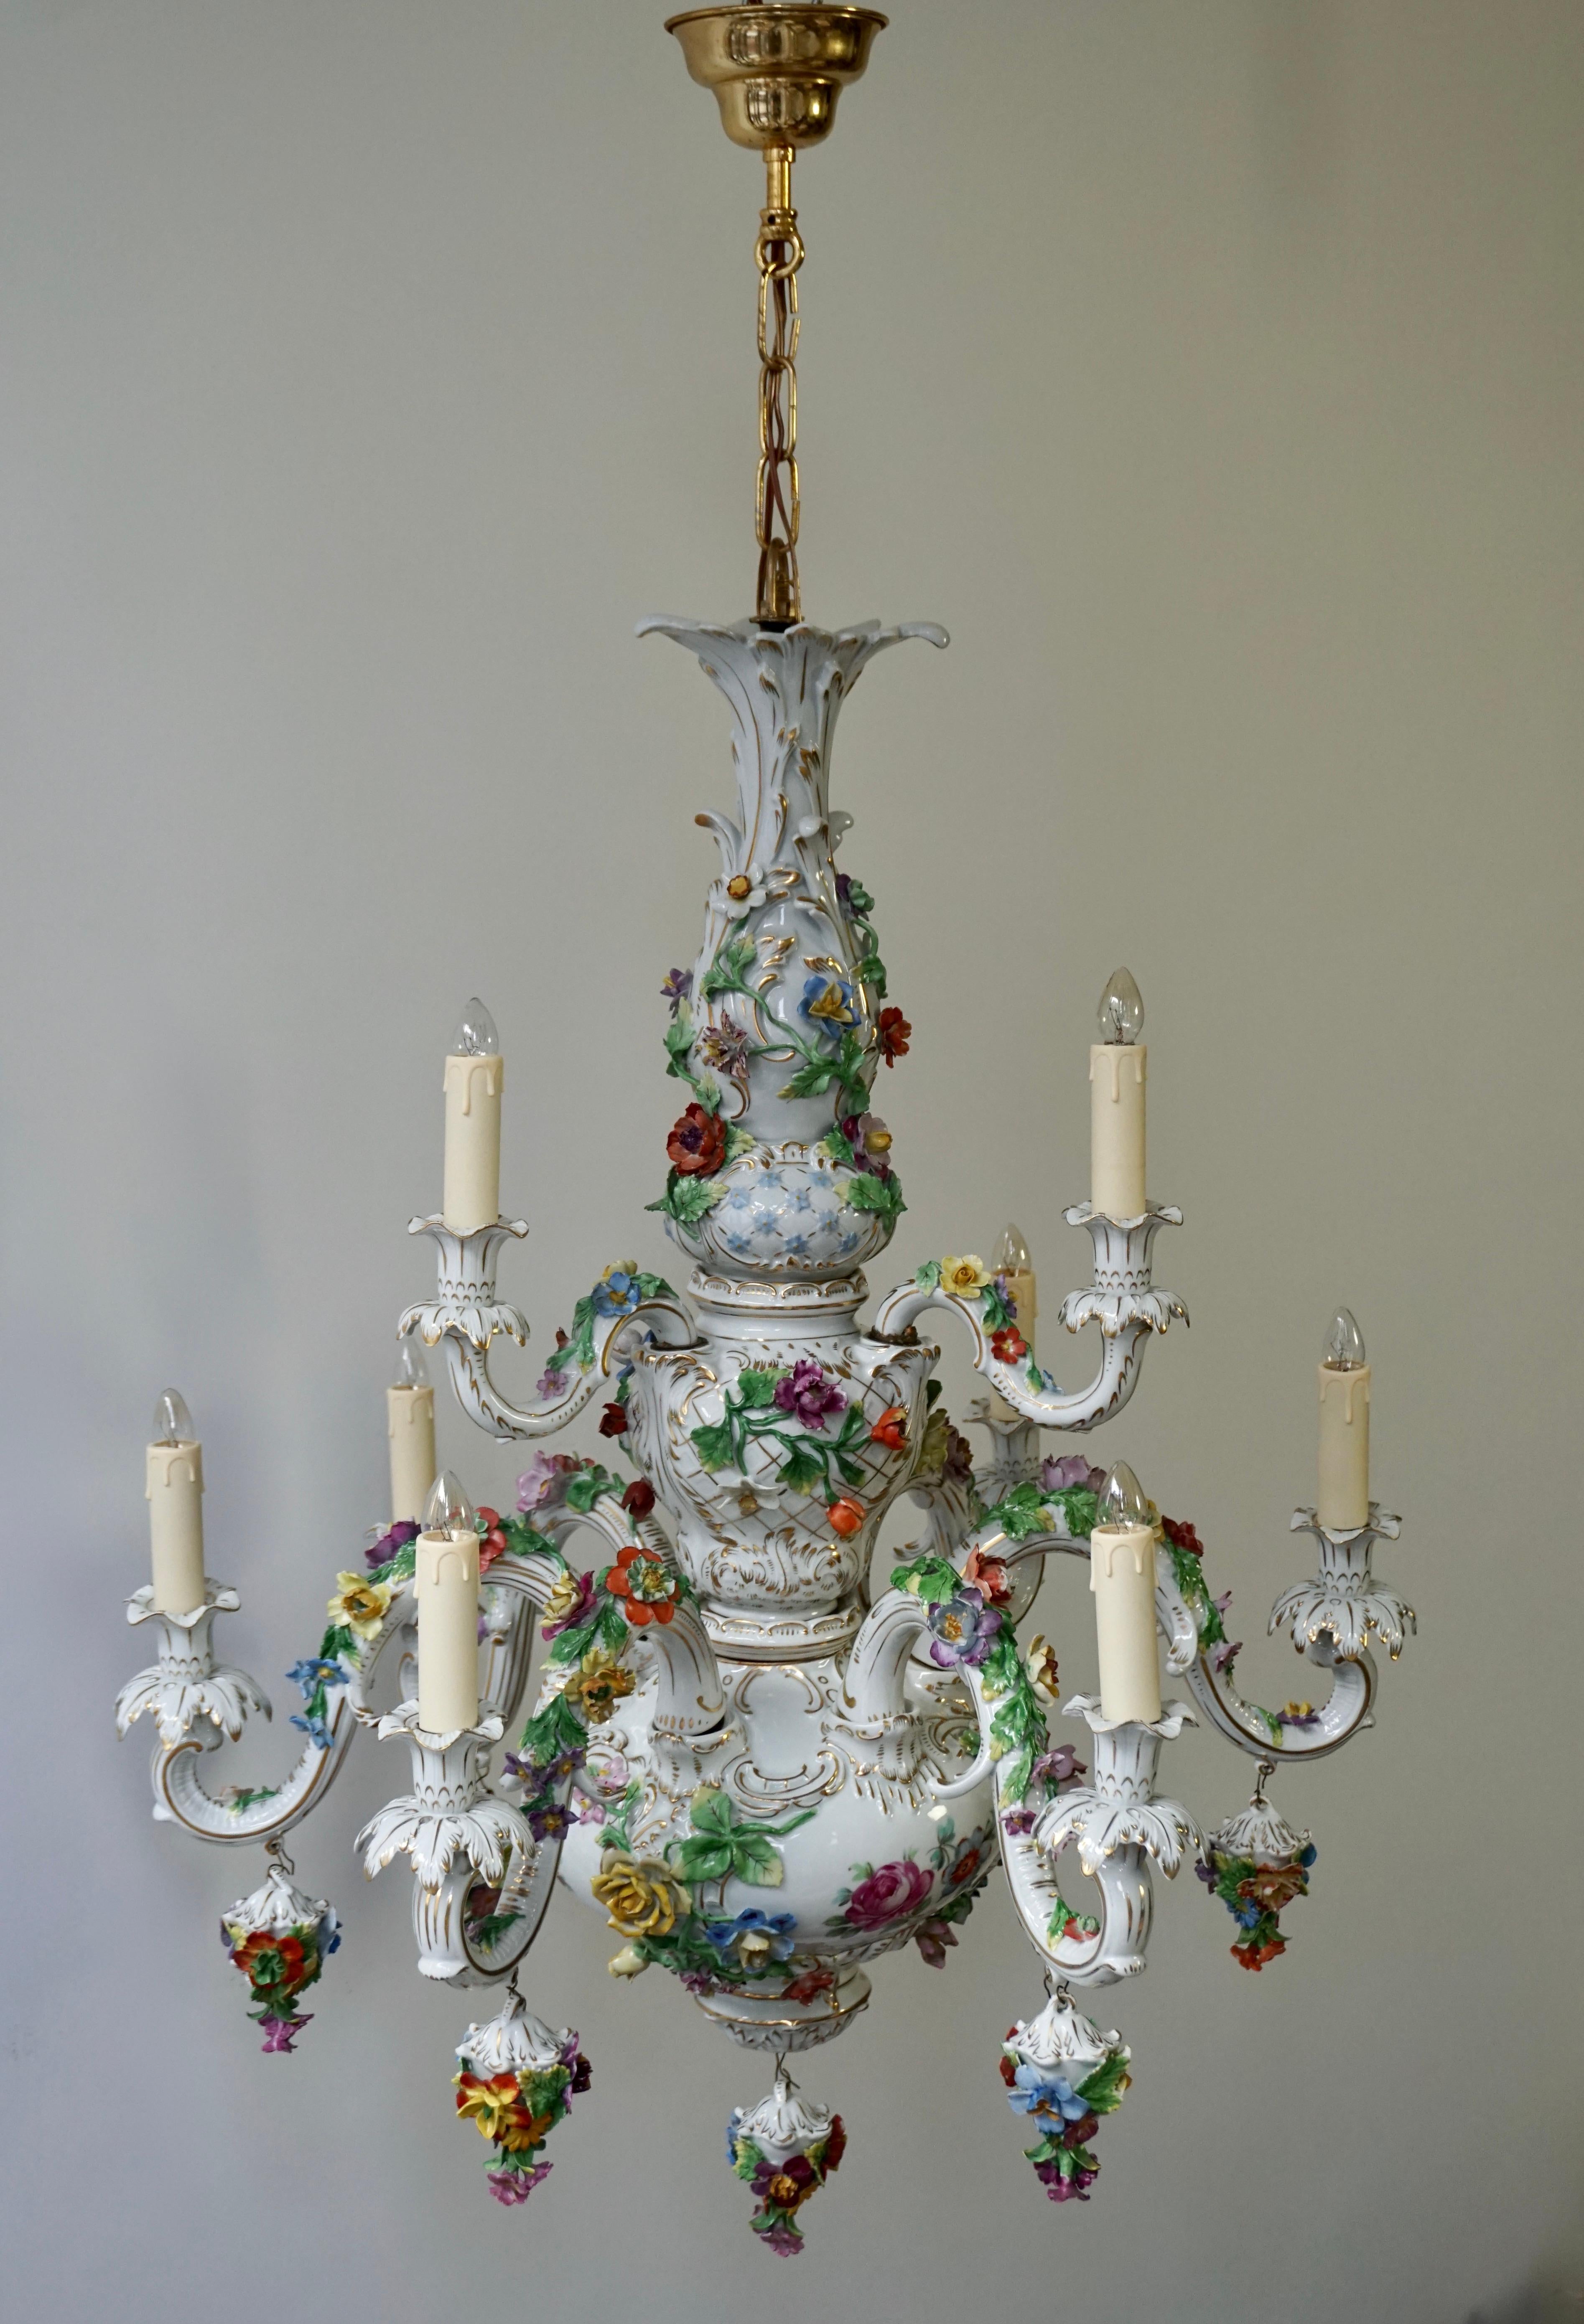 Blanketed in a multitude of floral bouquets, this monumental porcelain chandelier was possible crafted in Italy or Germany. A marvellous example of exceptional artistry, this enchanting tole multi light double tier 9-light fixture exemplifies the